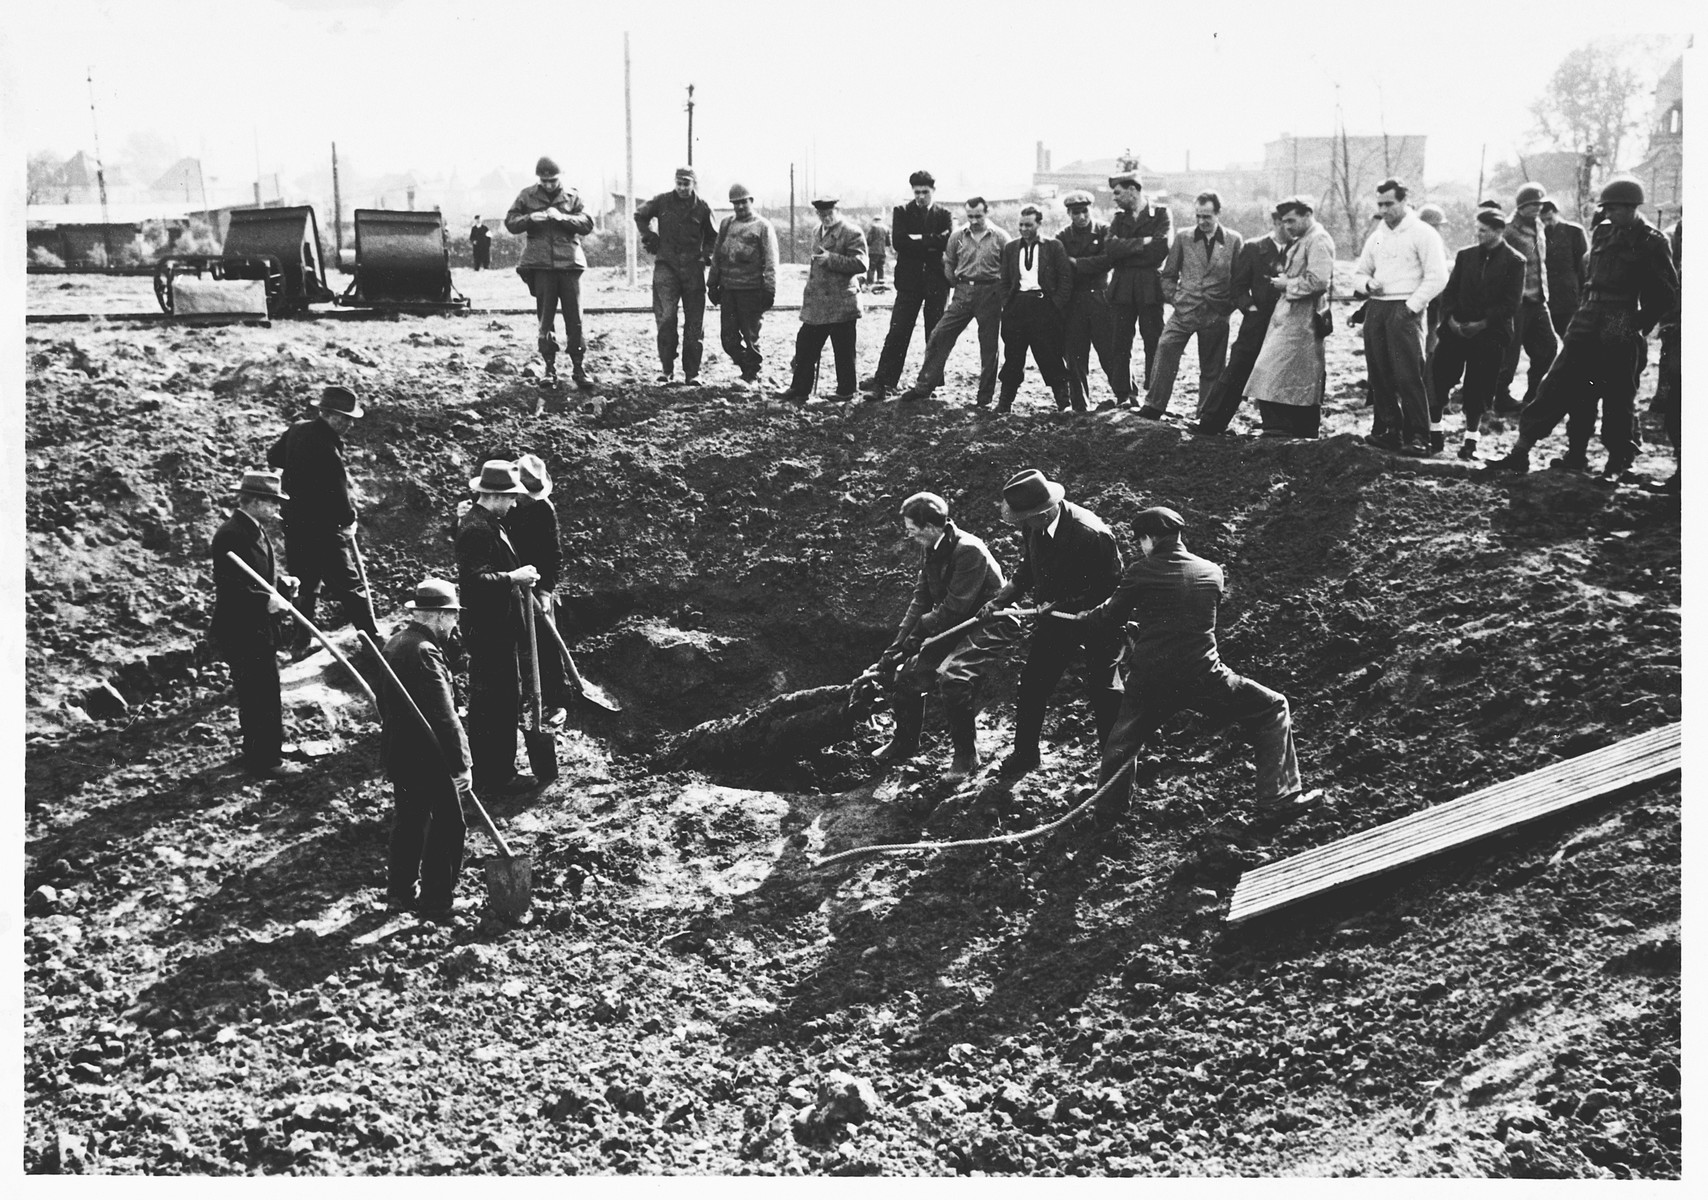 Under supervision of American soldiers, German civilians exhume the corpses of Italians shot in shell holes on the orders of the Gestapo in Wilhelmshoehe on March 31, 1945.